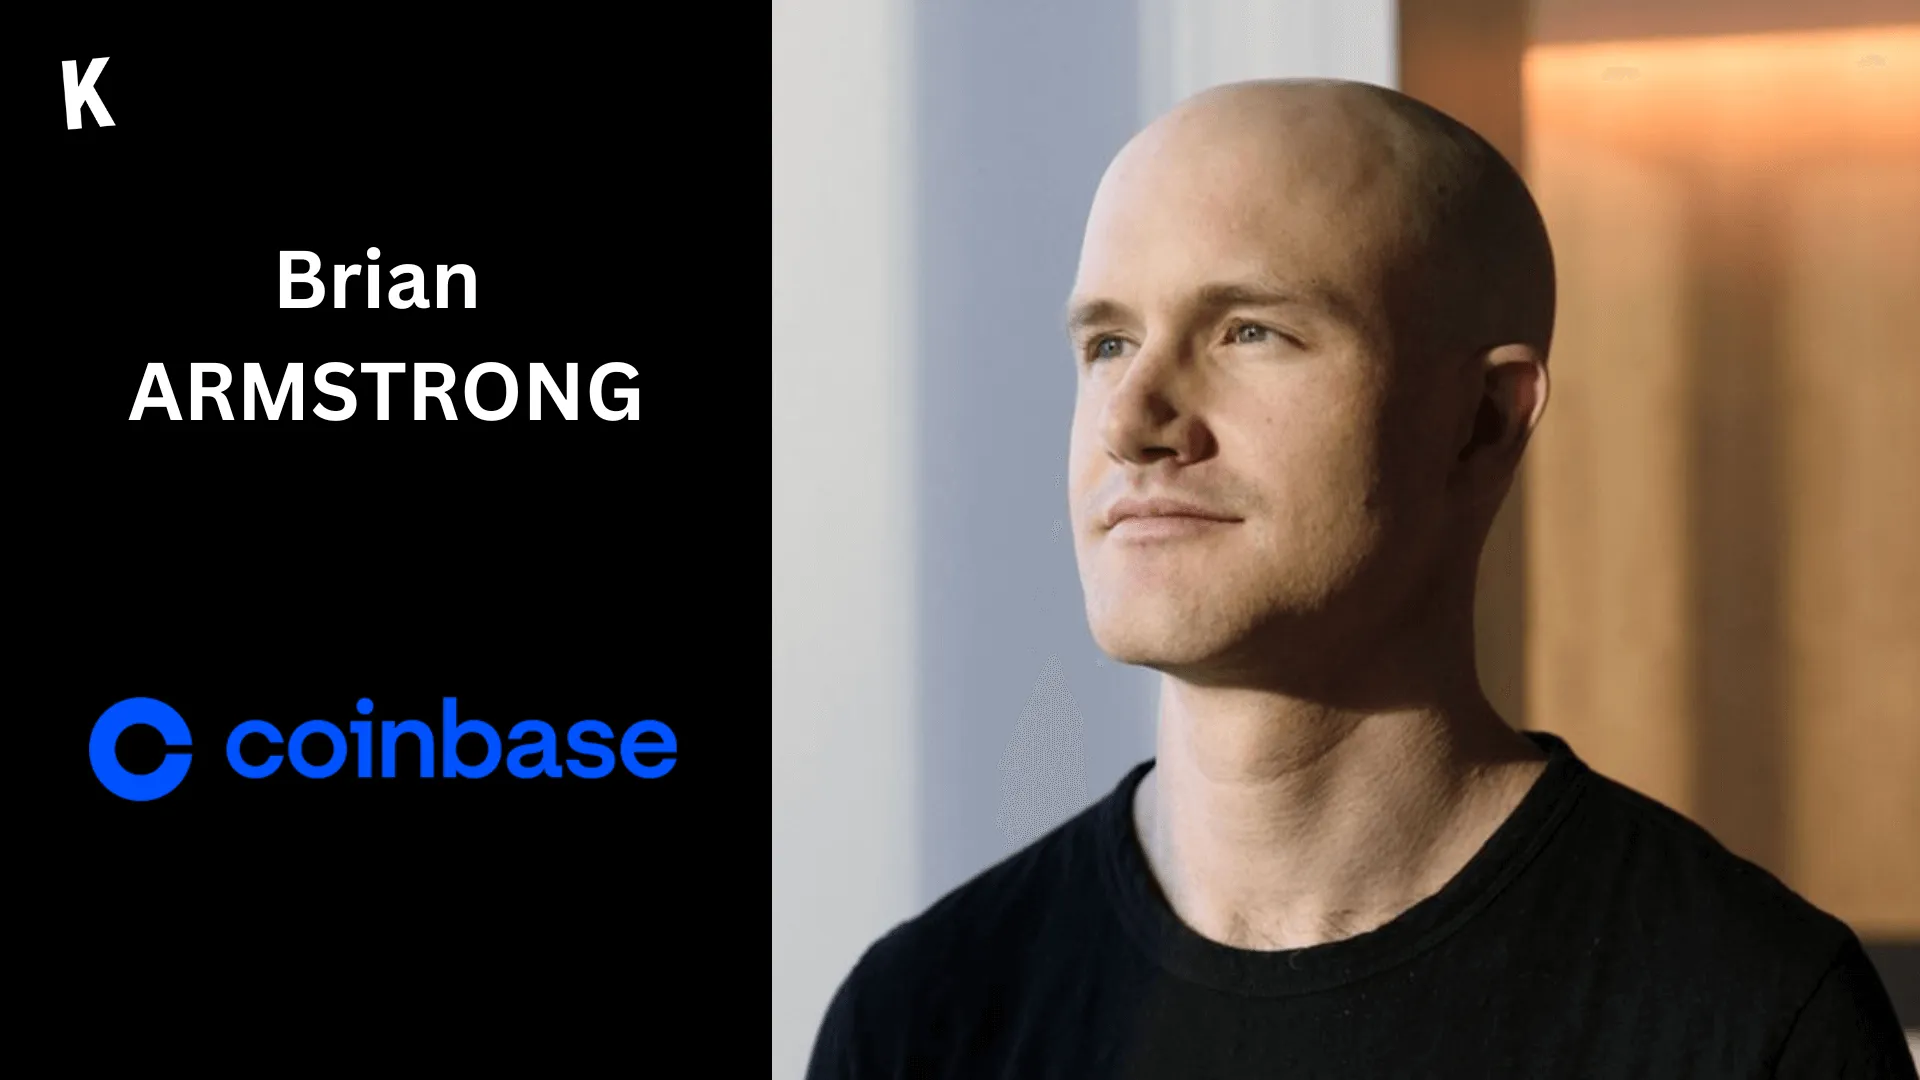 Brian Armstrong Portrait and Coinbase logo